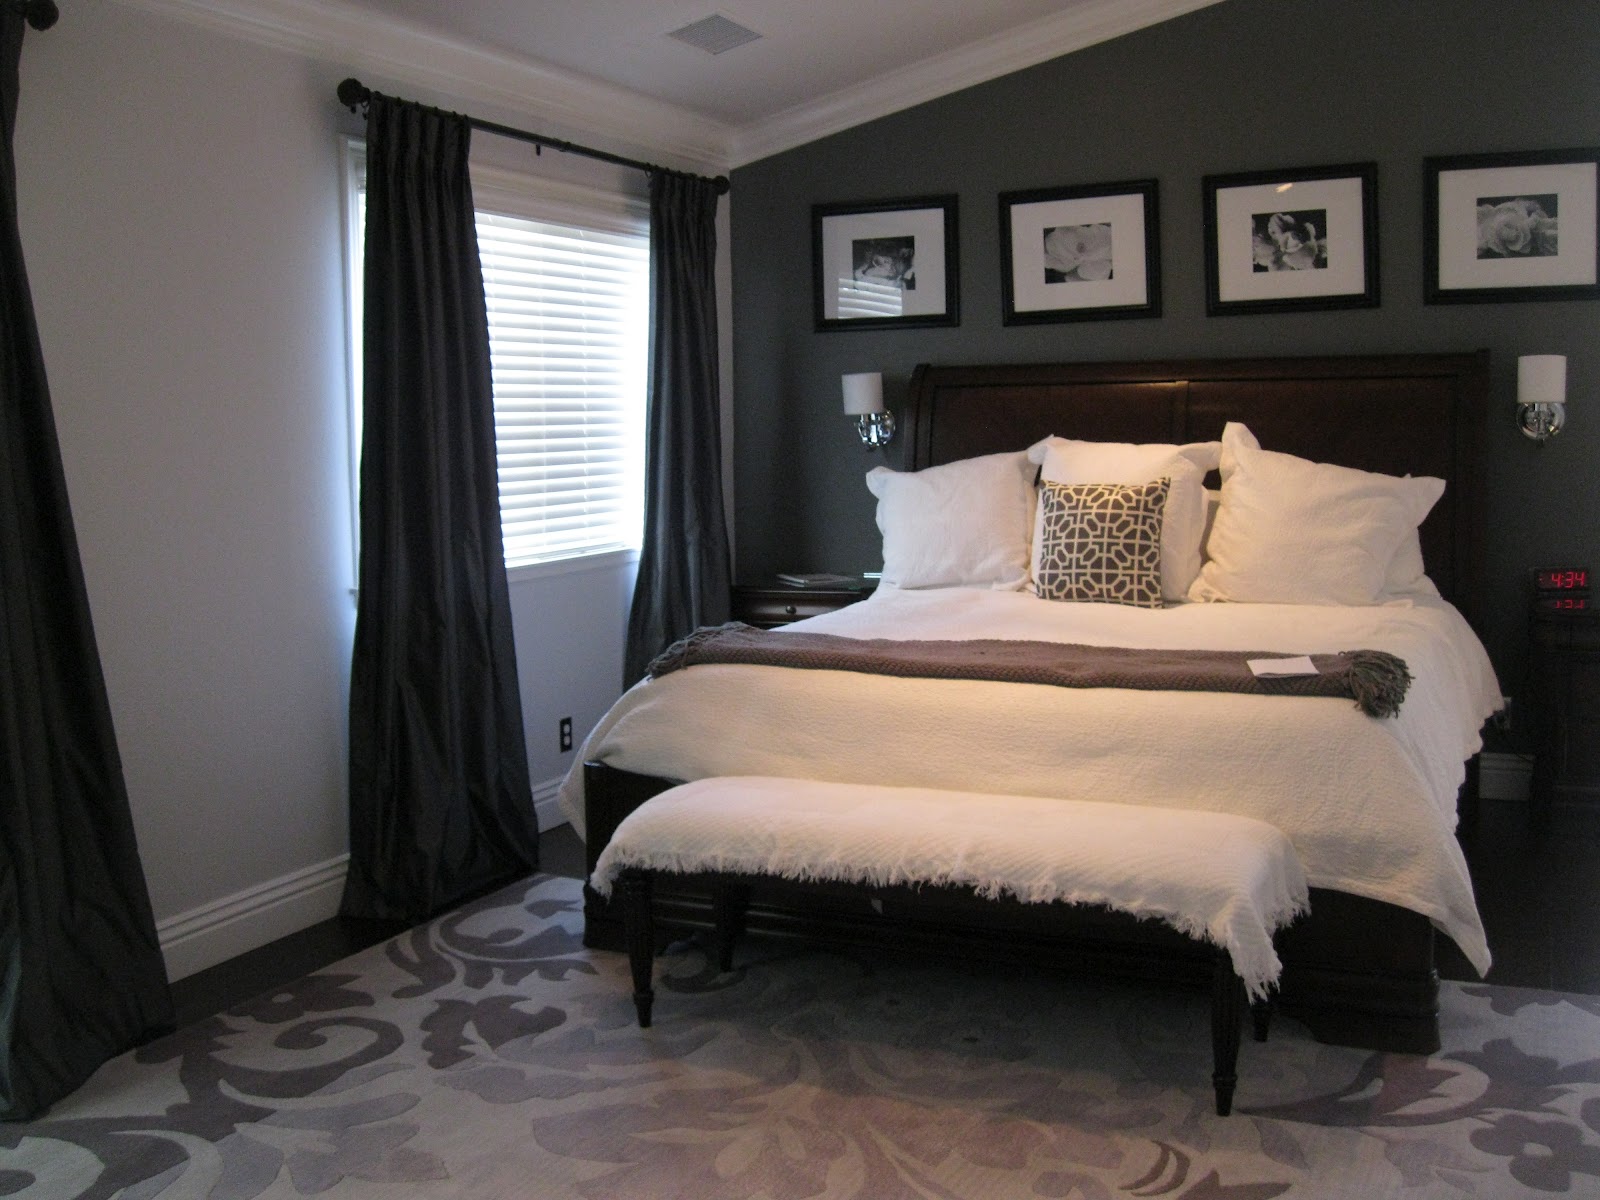 C B I D HOME DECOR  and DESIGN  CHARCOAL GRAY  MASTER  SUITE 